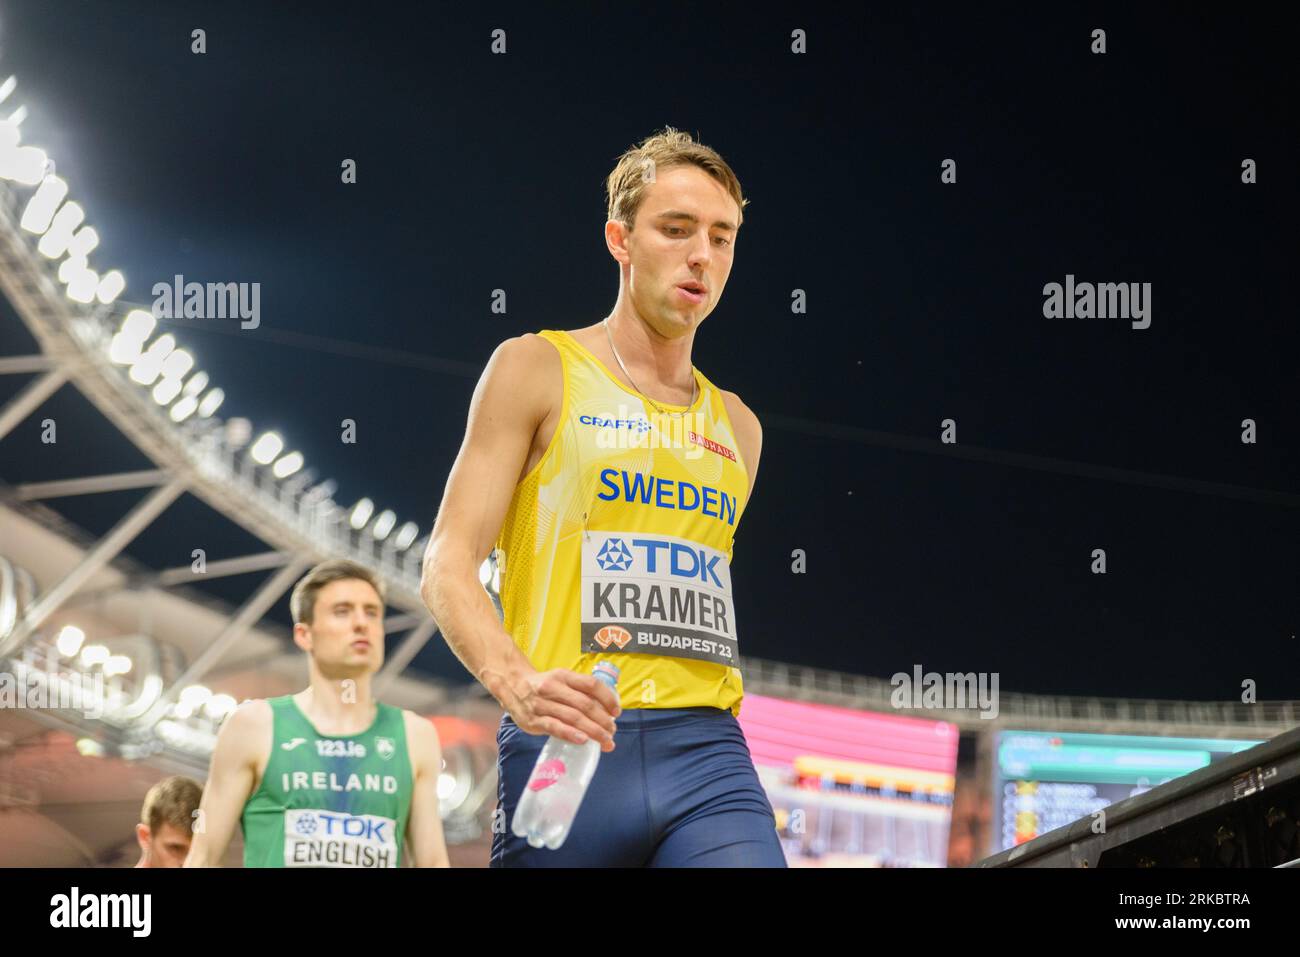 Andreas Kramer (Sweden) before the 800 metres semi-final during the world athletics championships 2023 at the National Athletics Centre, in Budapest, Hungary. (Sven Beyrich/SPP) Credit: SPP Sport Press Photo. /Alamy Live News Stock Photo